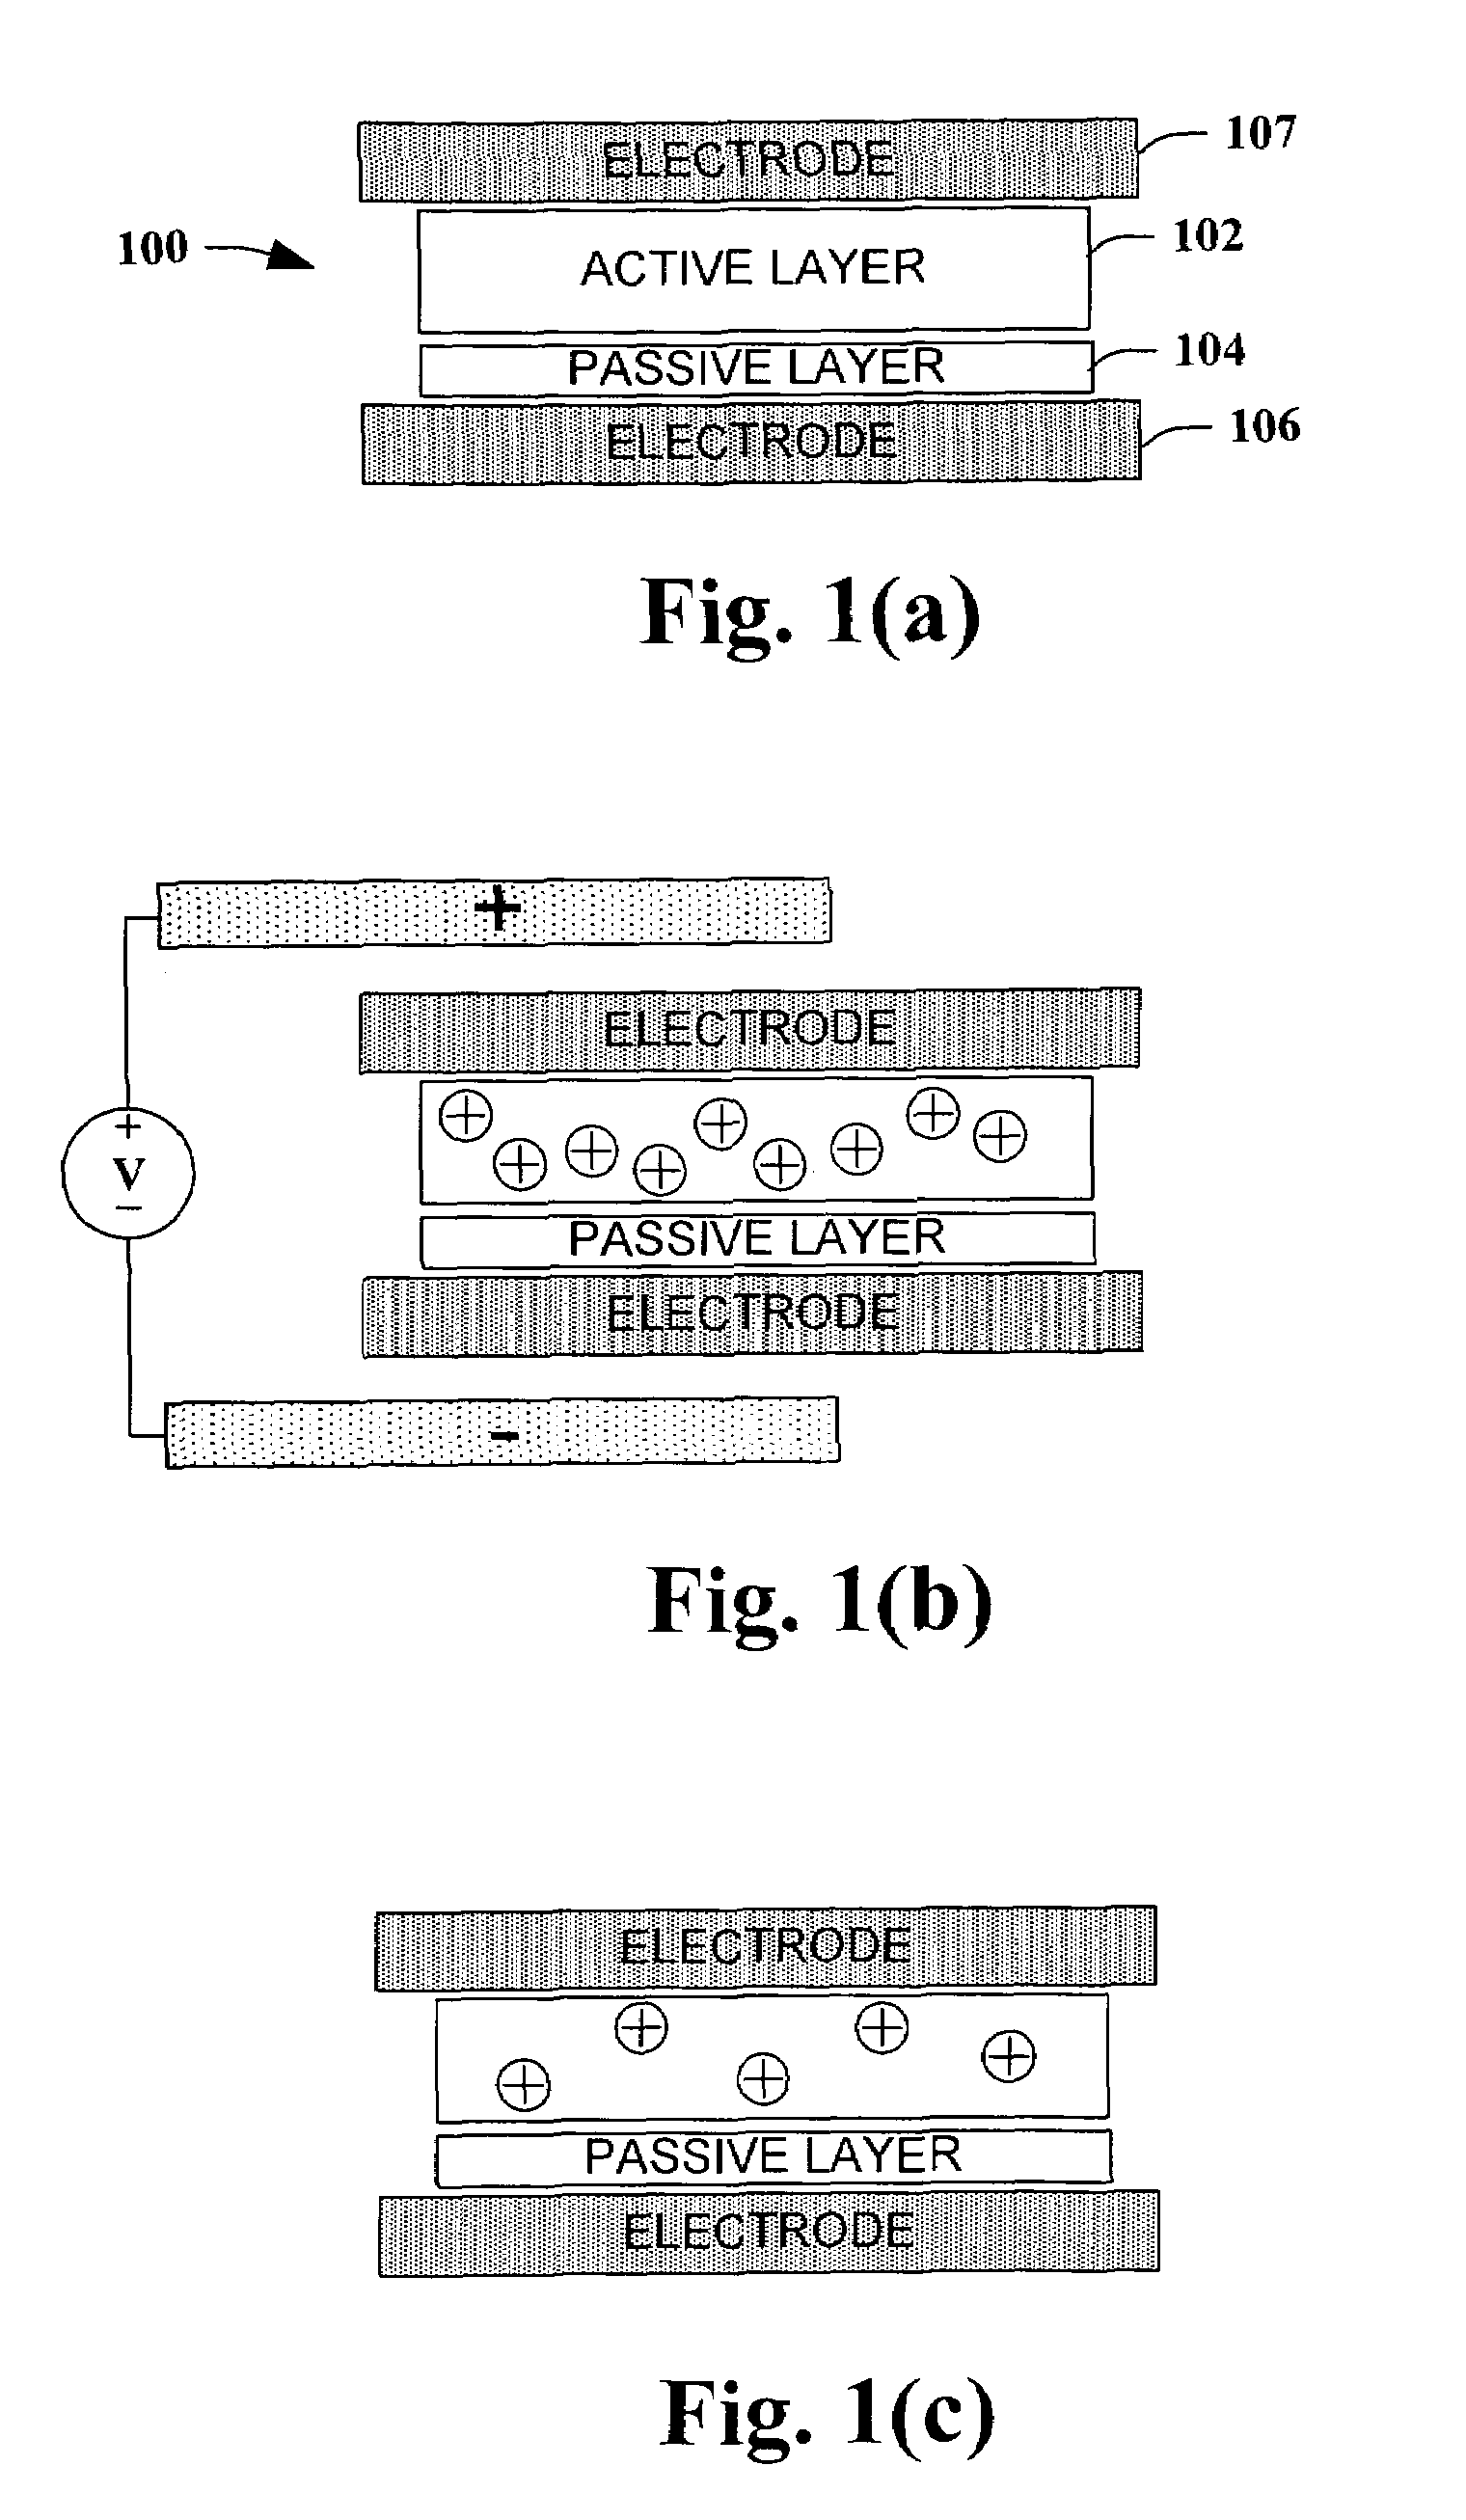 Polymer memory cell operation